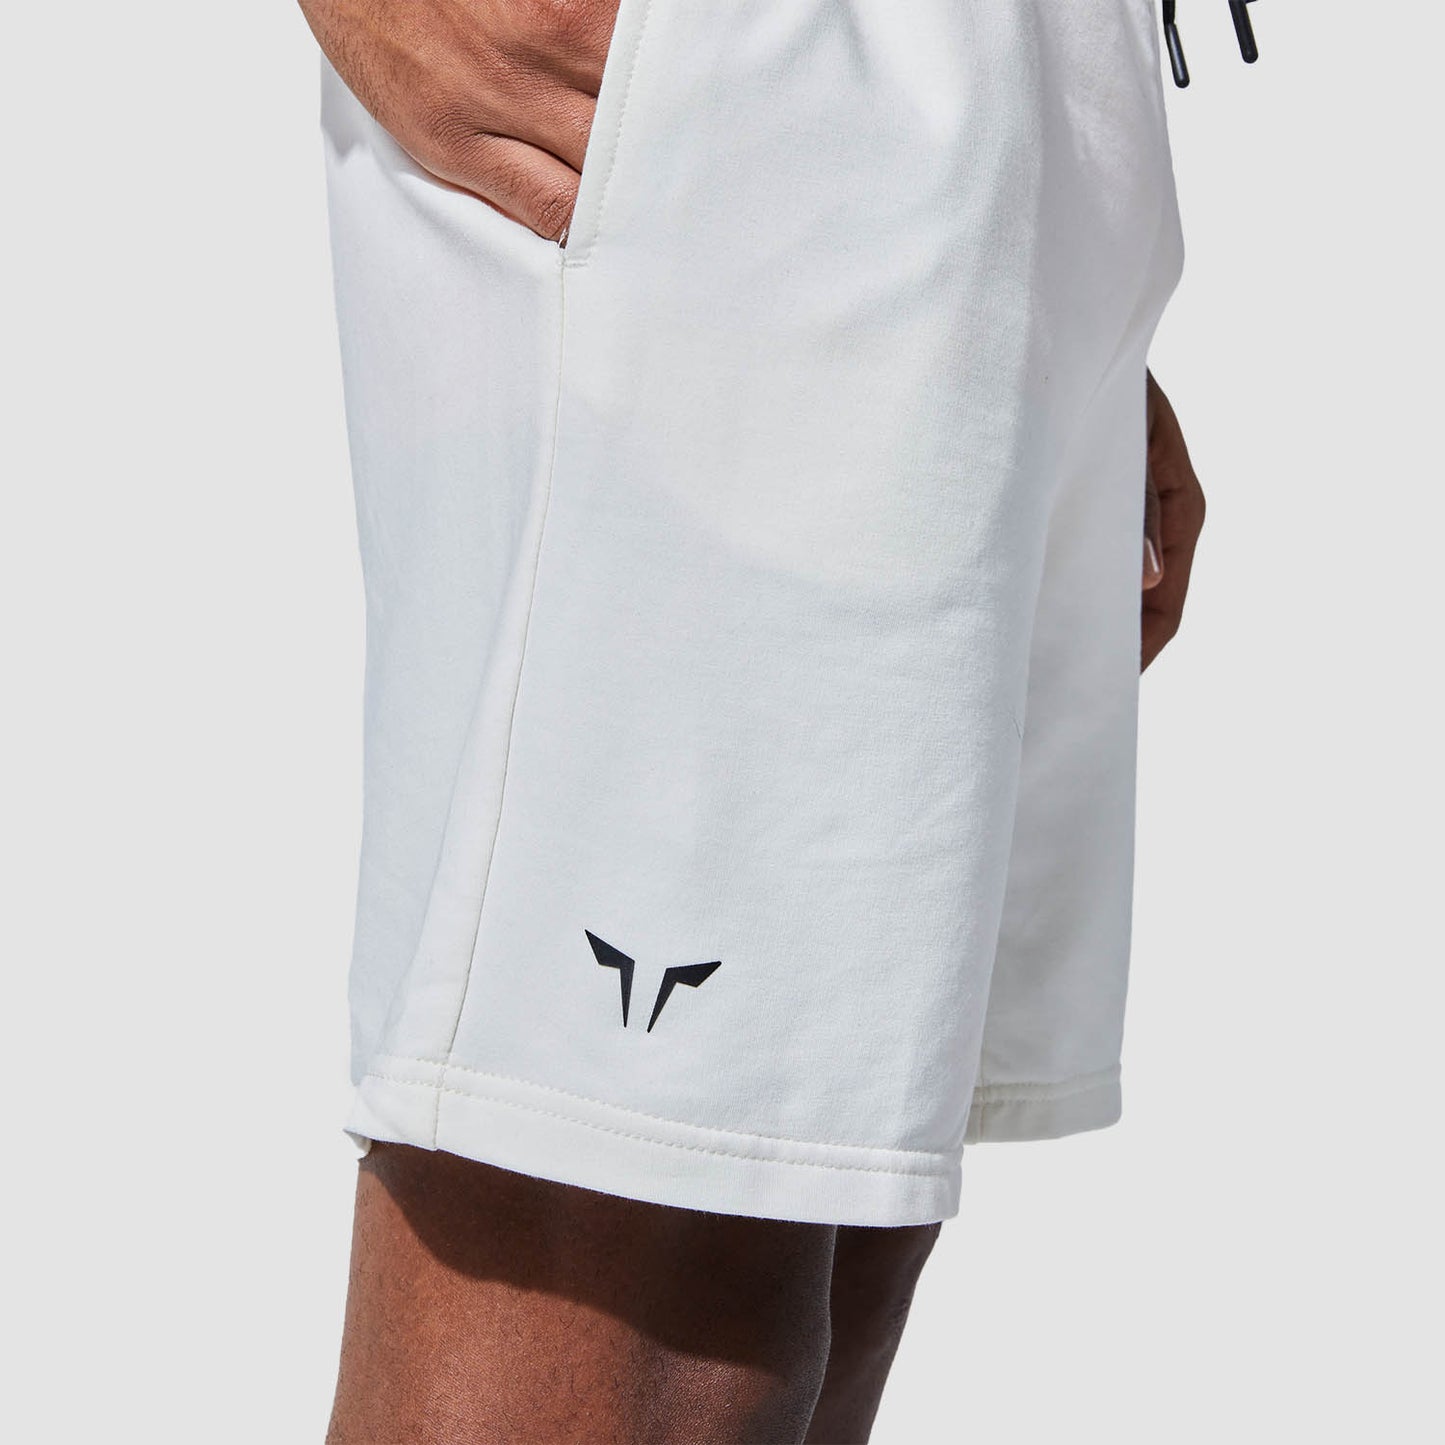 squatwolf-gym-wear-graphic-wordmark-jogger-shorts-white-workout-shorts-for-men